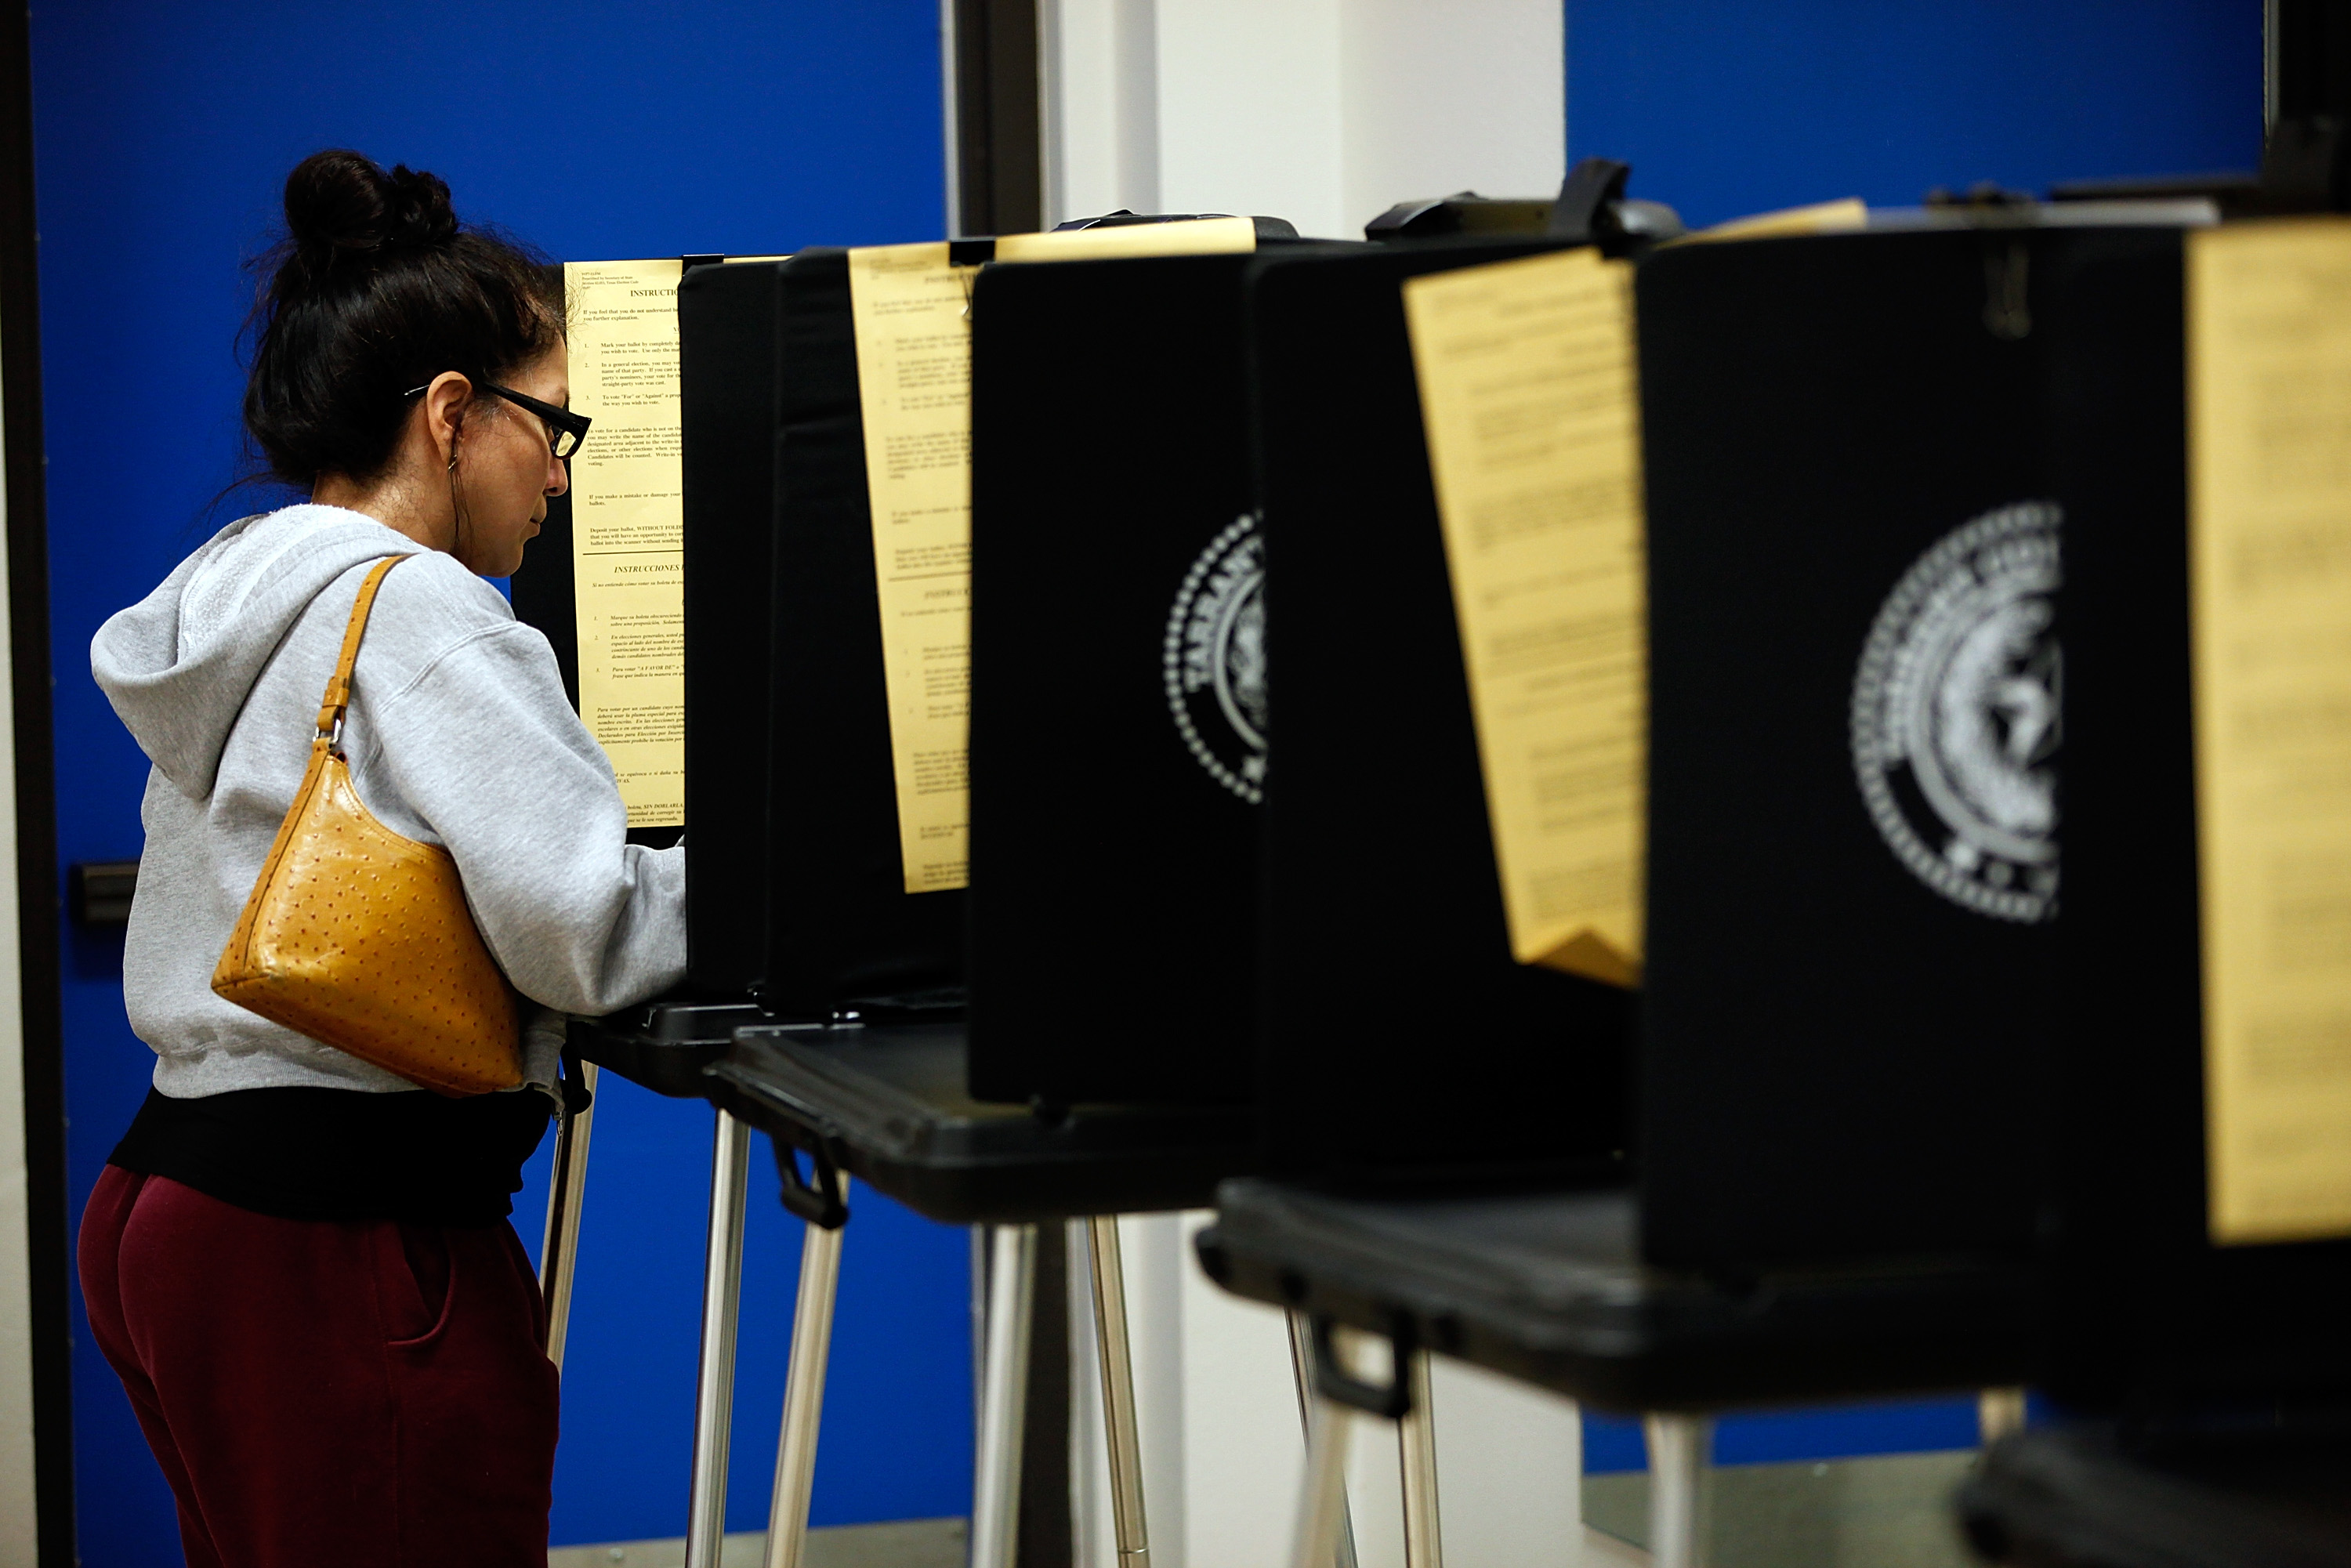 A voter completes her ballot on November 6, 2012 in Fort Worth, Texas.